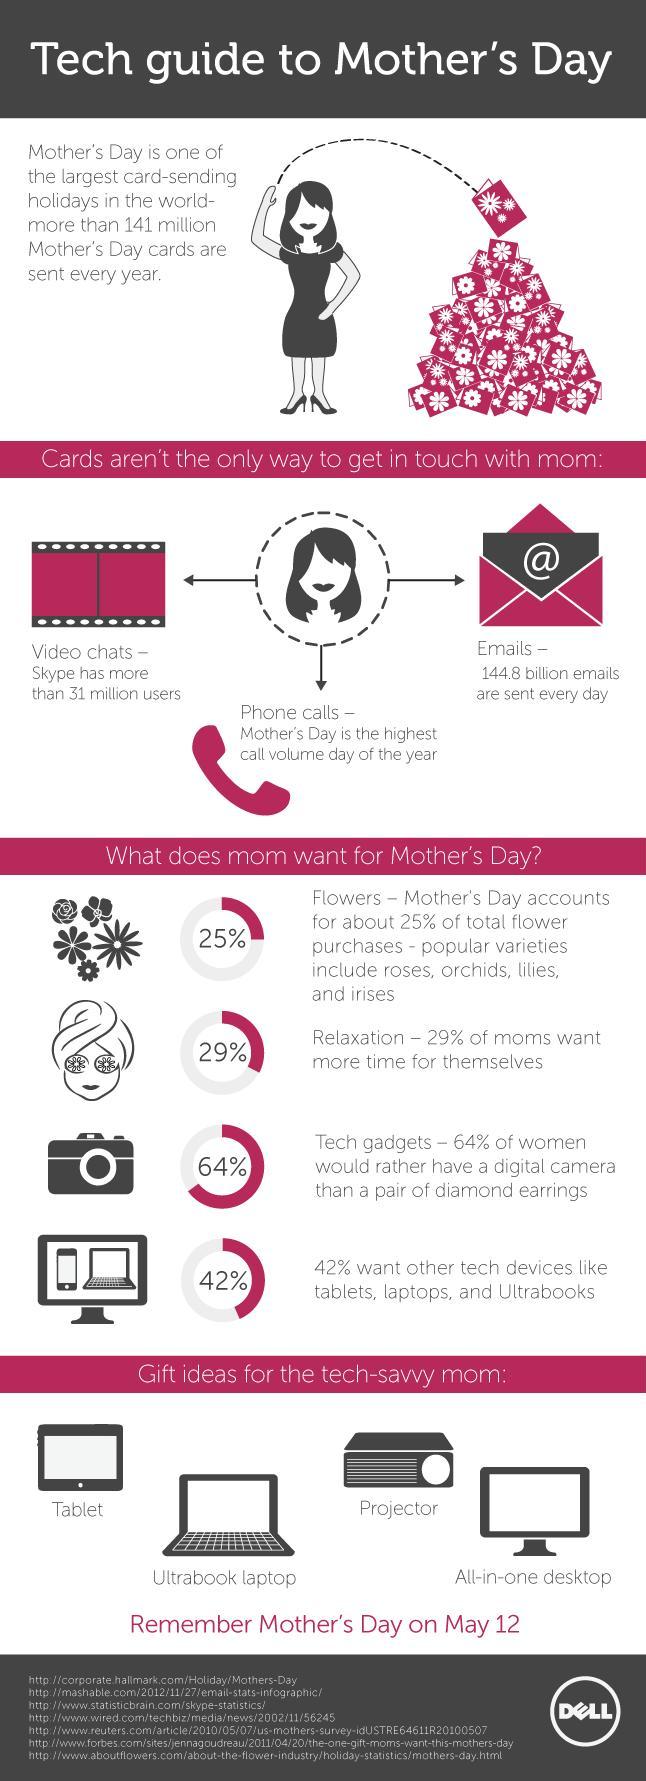 Technology_Mothers Day Gift Guide